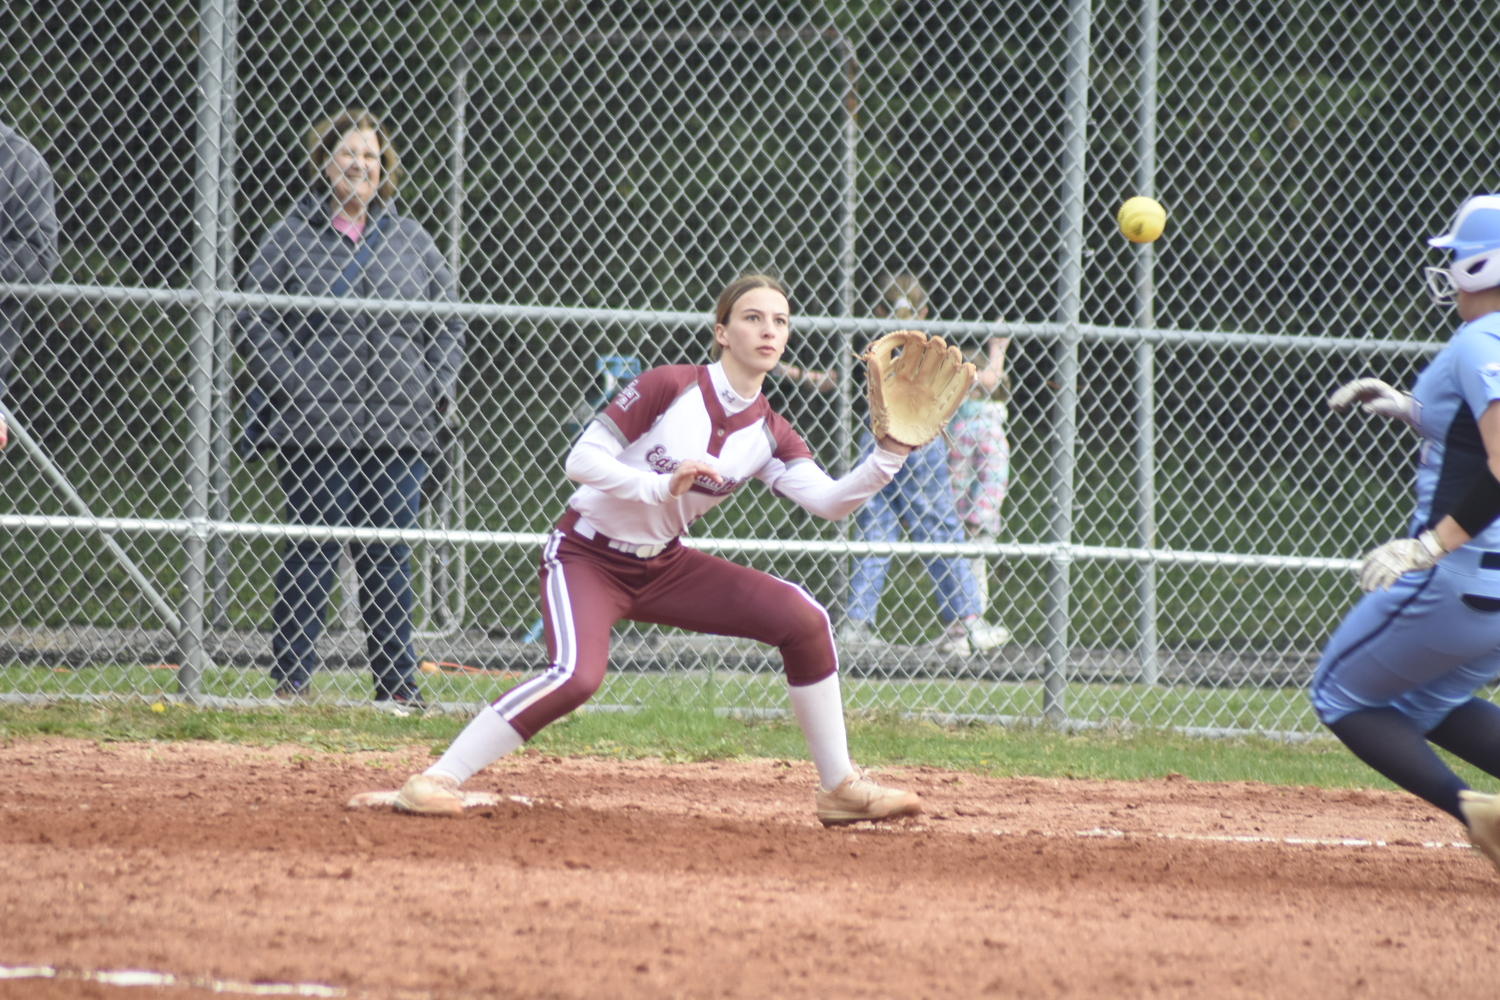 Olivia Dodge takes a throw at third base with a Rocky Point baserunner bearing down on her. DREW BUDD